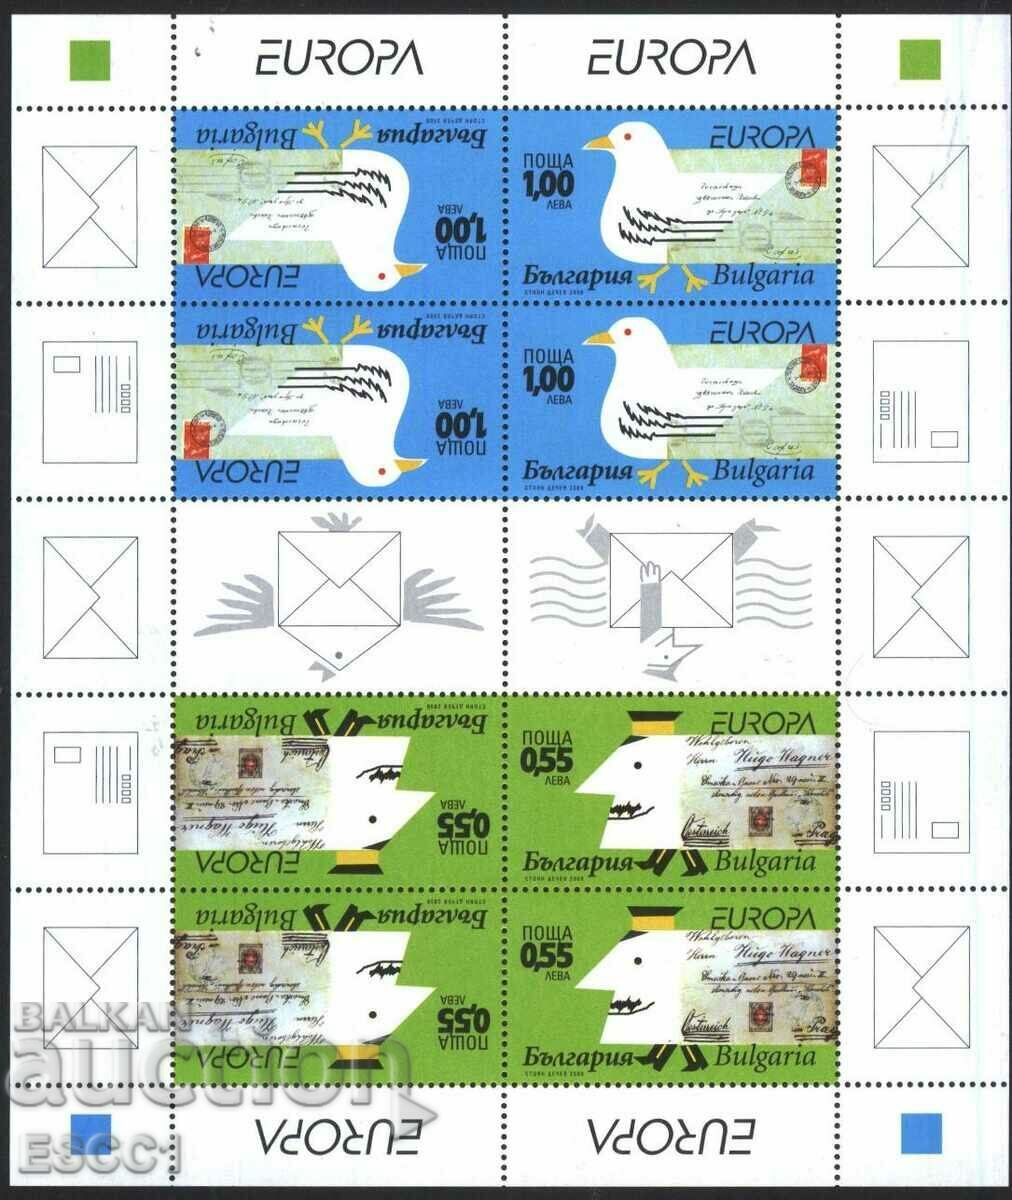 Clean stamps in small sheet Europe SEP 2008 from Bulgaria